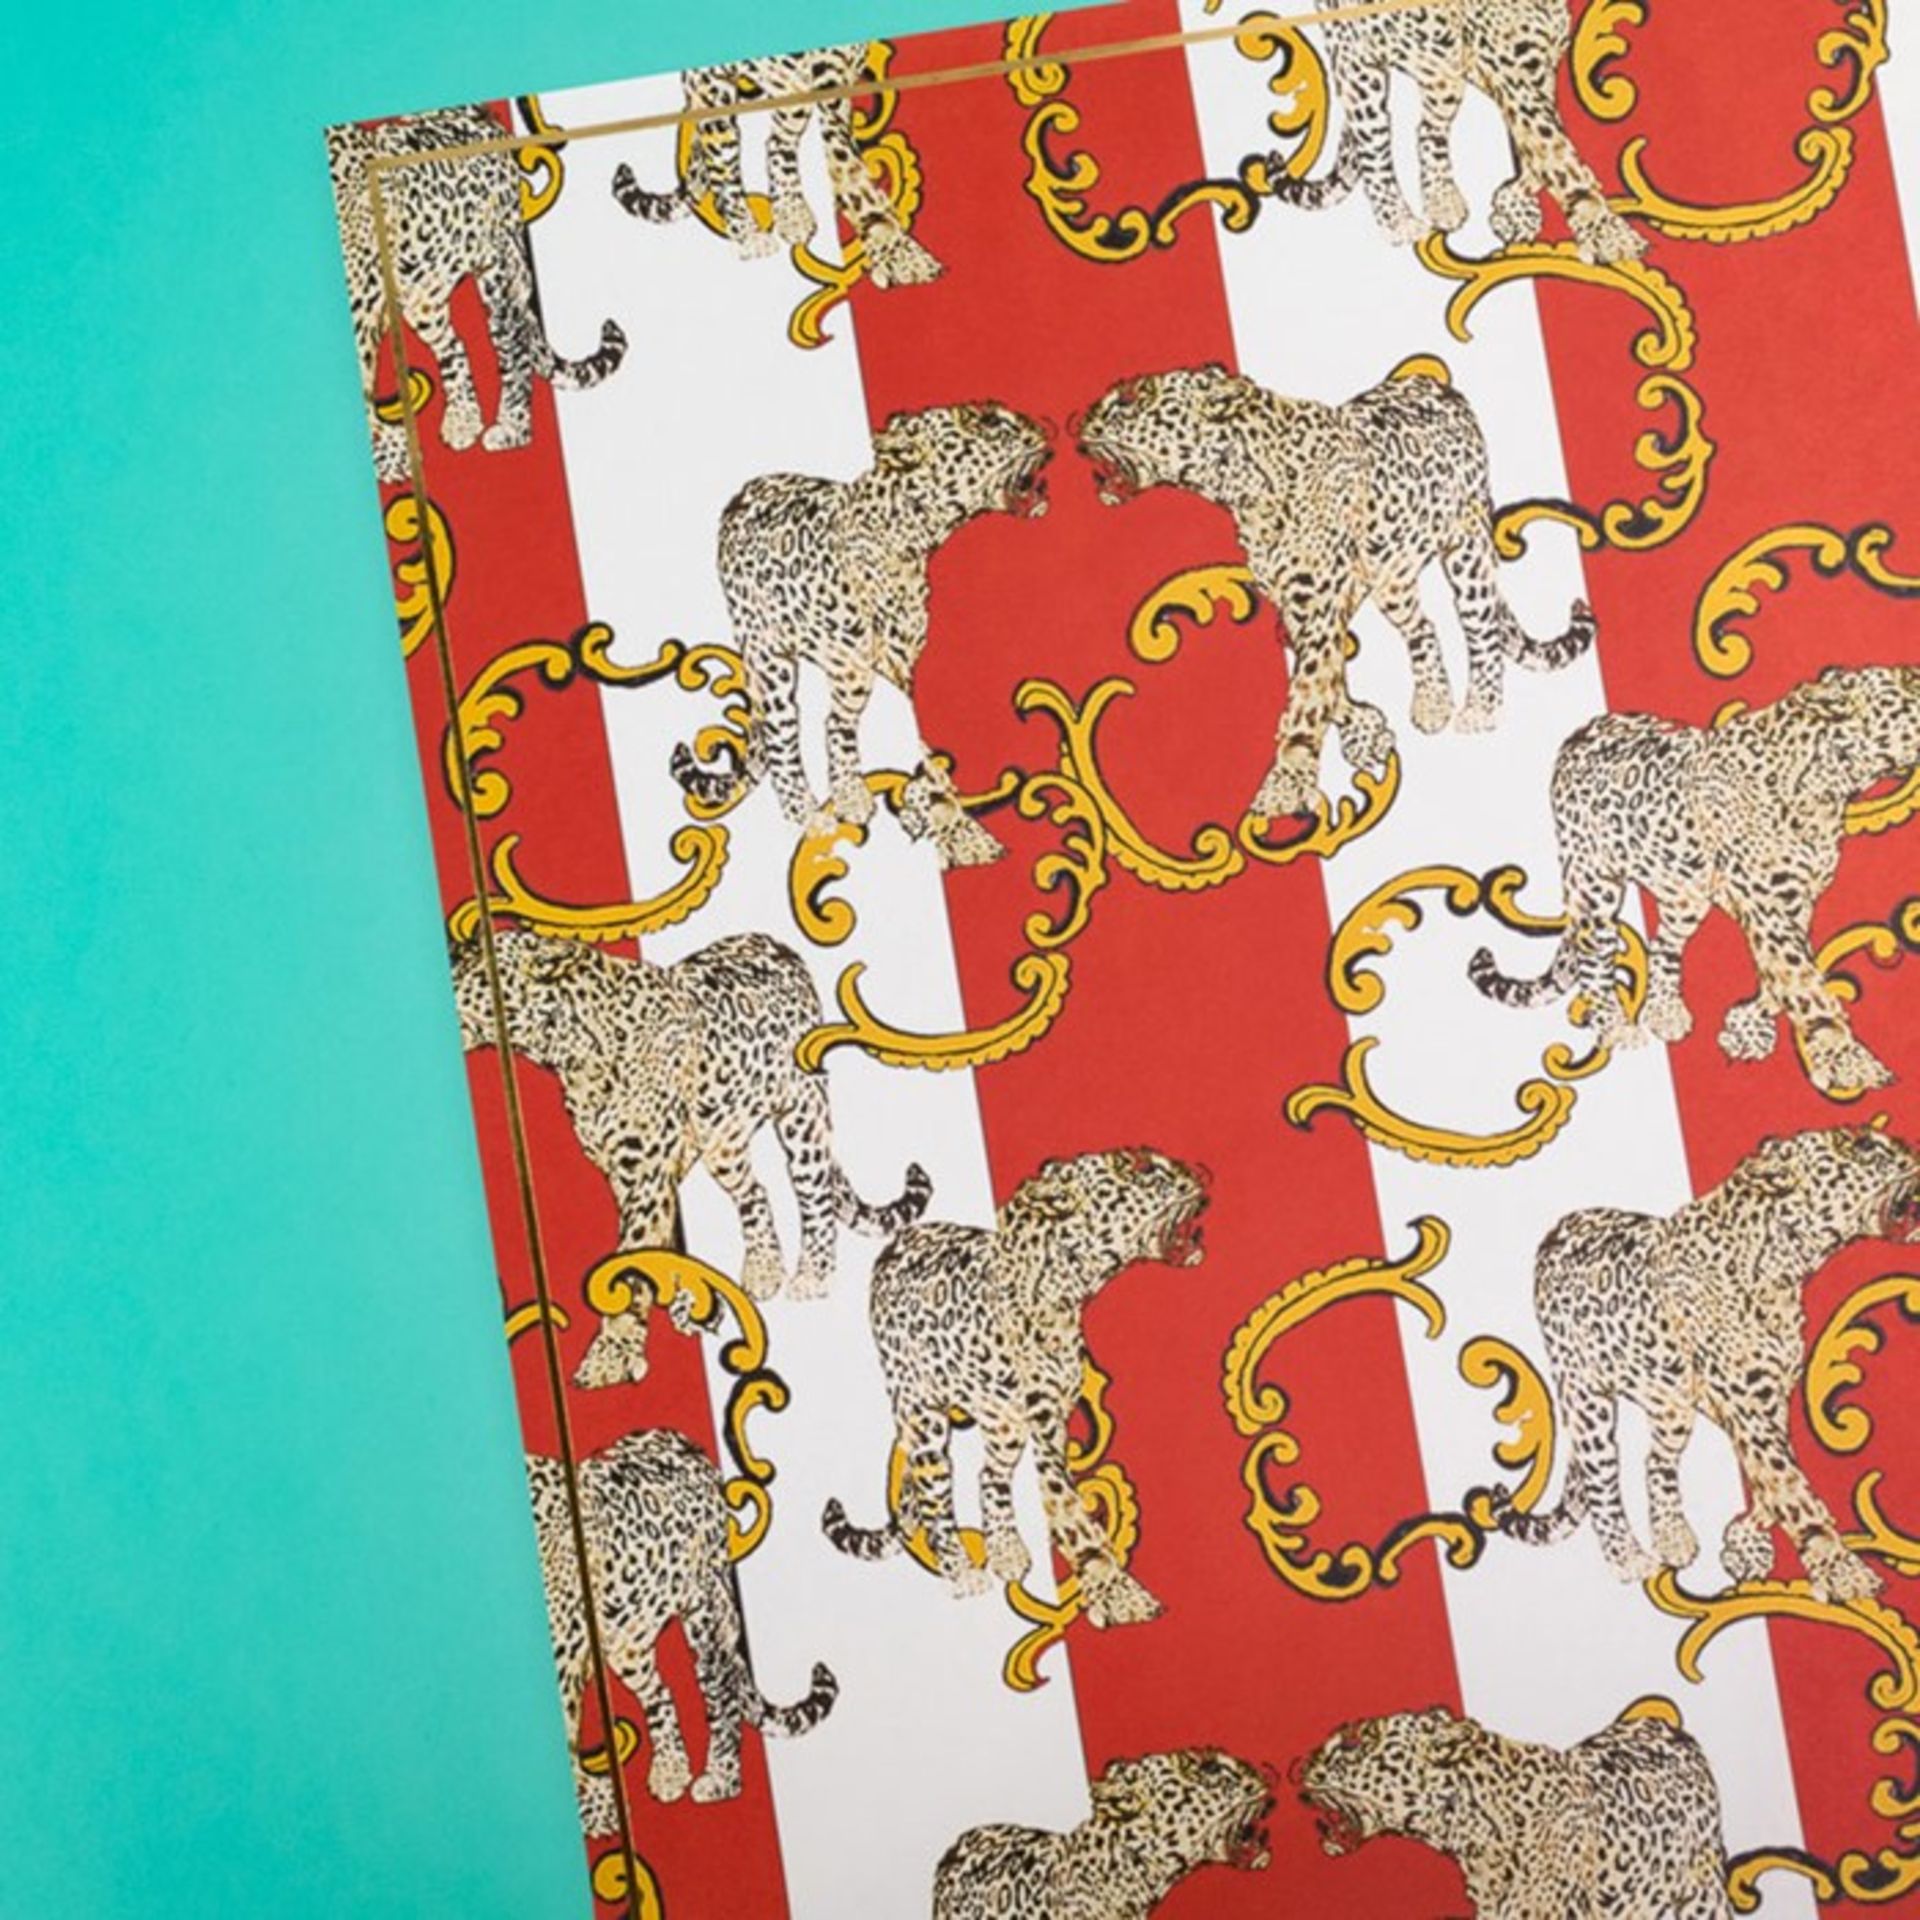 £150,000+ Stock of a Luxury Gift Wrap Distributor - Image 10 of 227